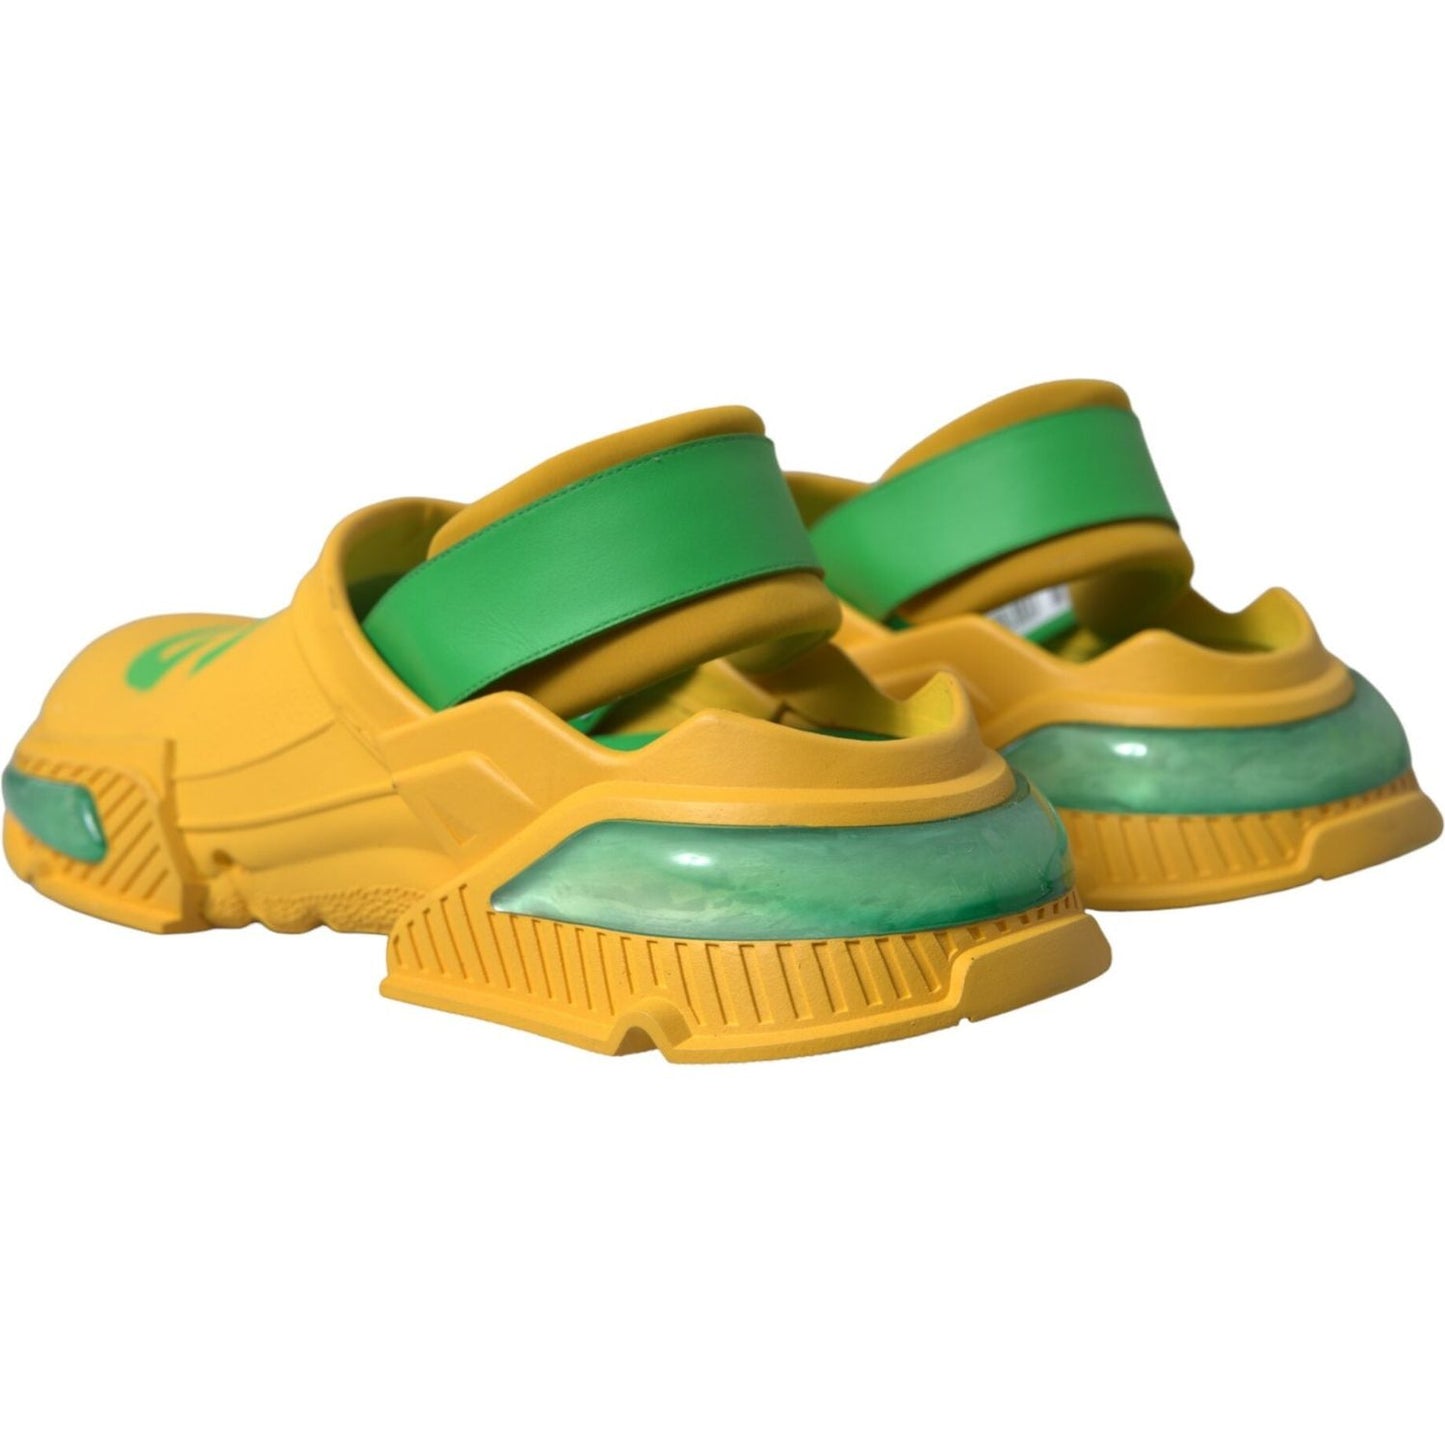 Dolce & Gabbana | Chic Rubber Clogs Slippers in Lush Colors| McRichard Designer Brands   